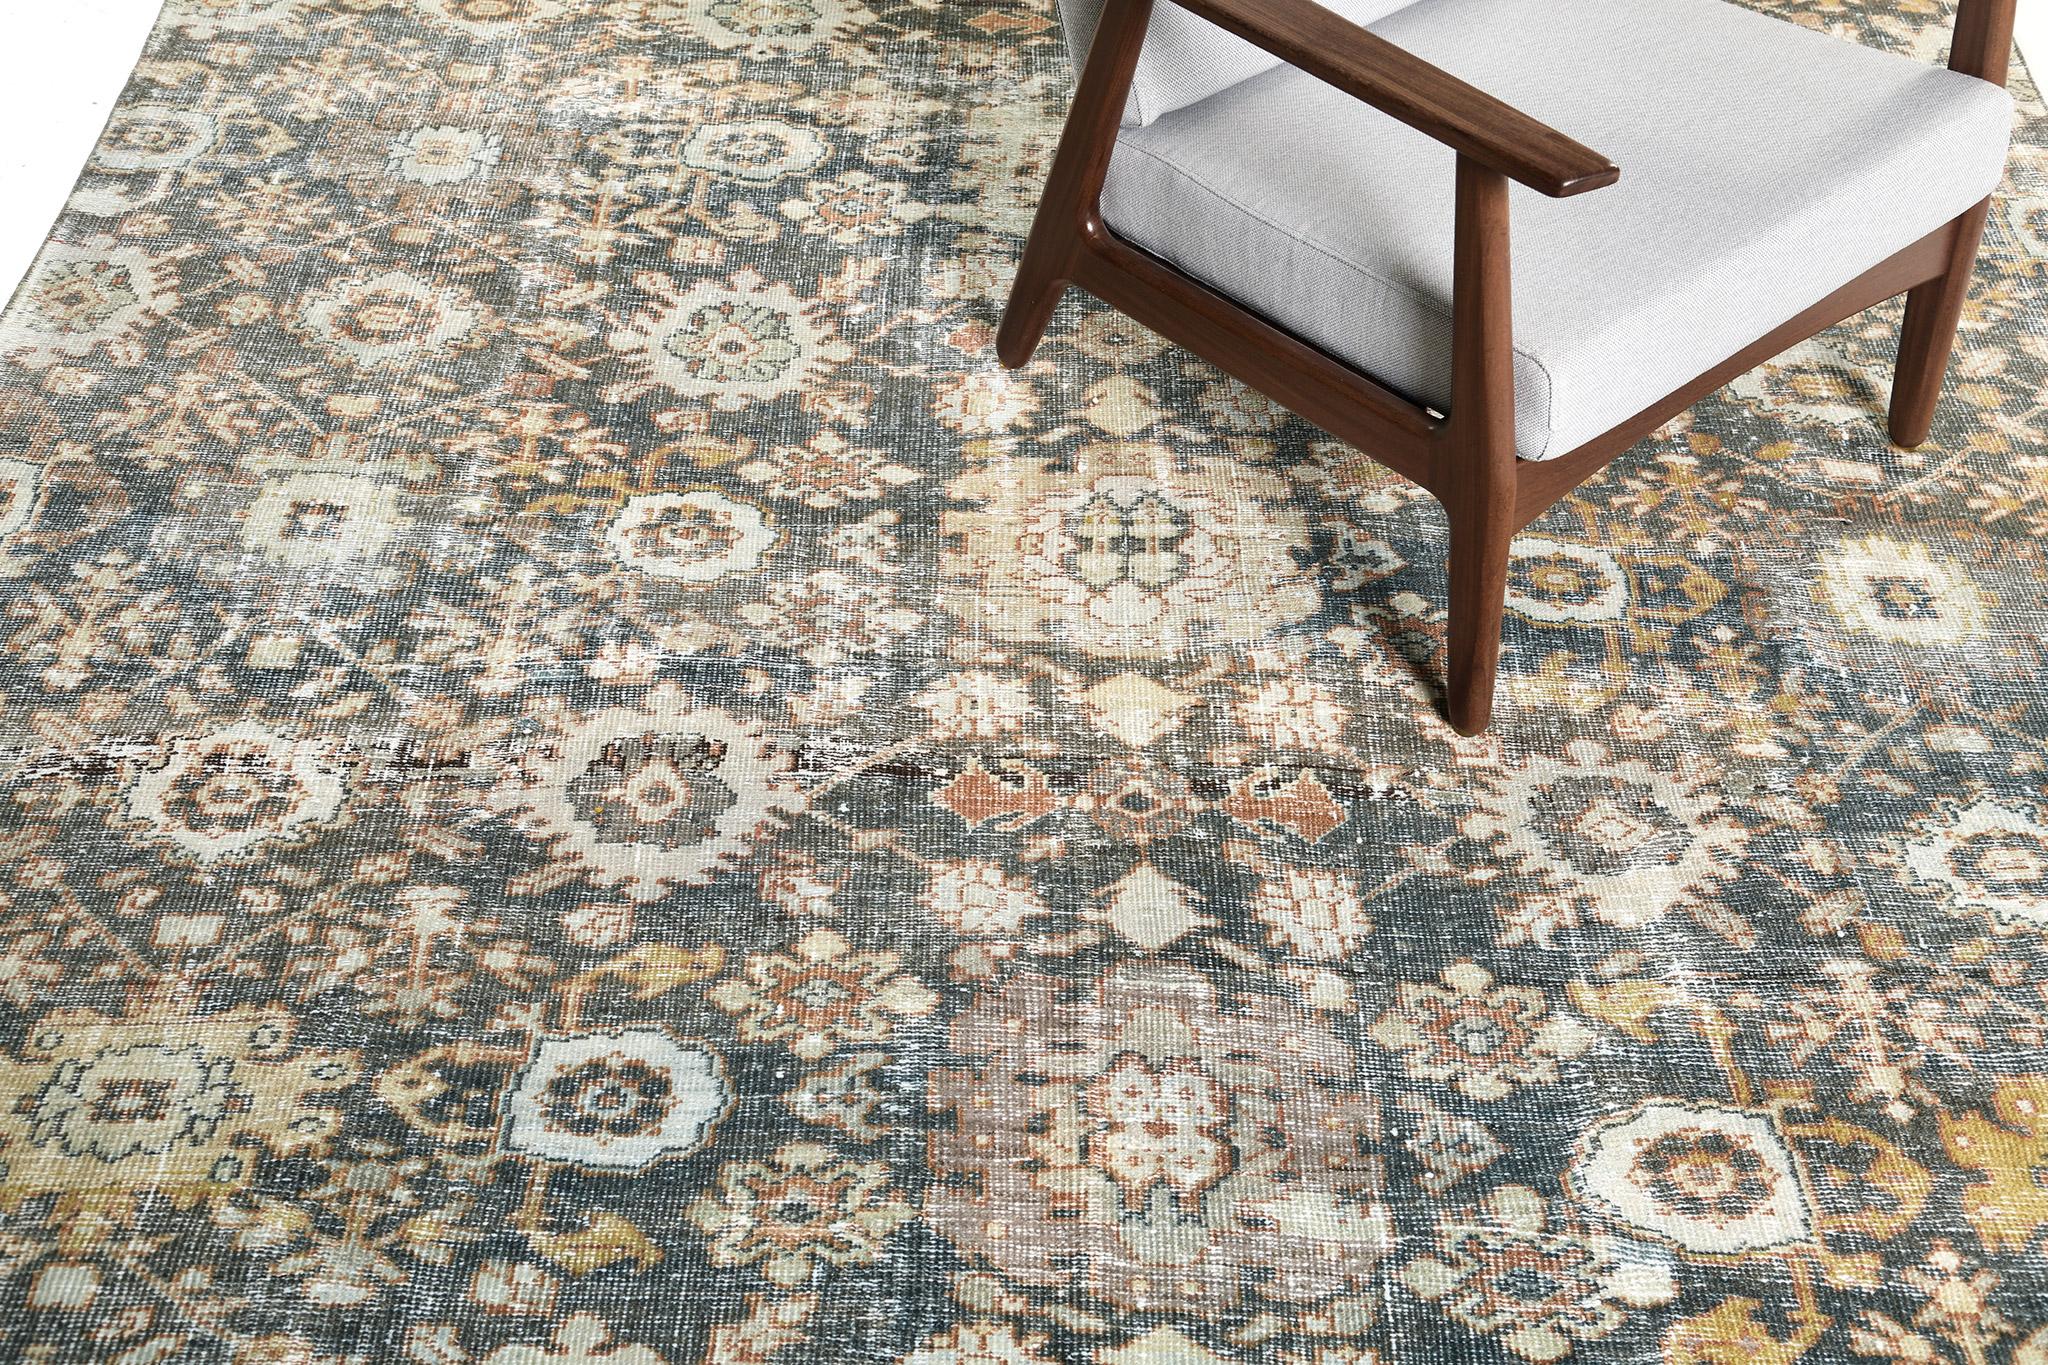 The conventional sensations given by this delicate rug features neutral-toned ornaments and motifs in an interplay of teal and raven fields enclosed by an alternating floral border. An outstanding rug in Sultanabad design that will amplify your room